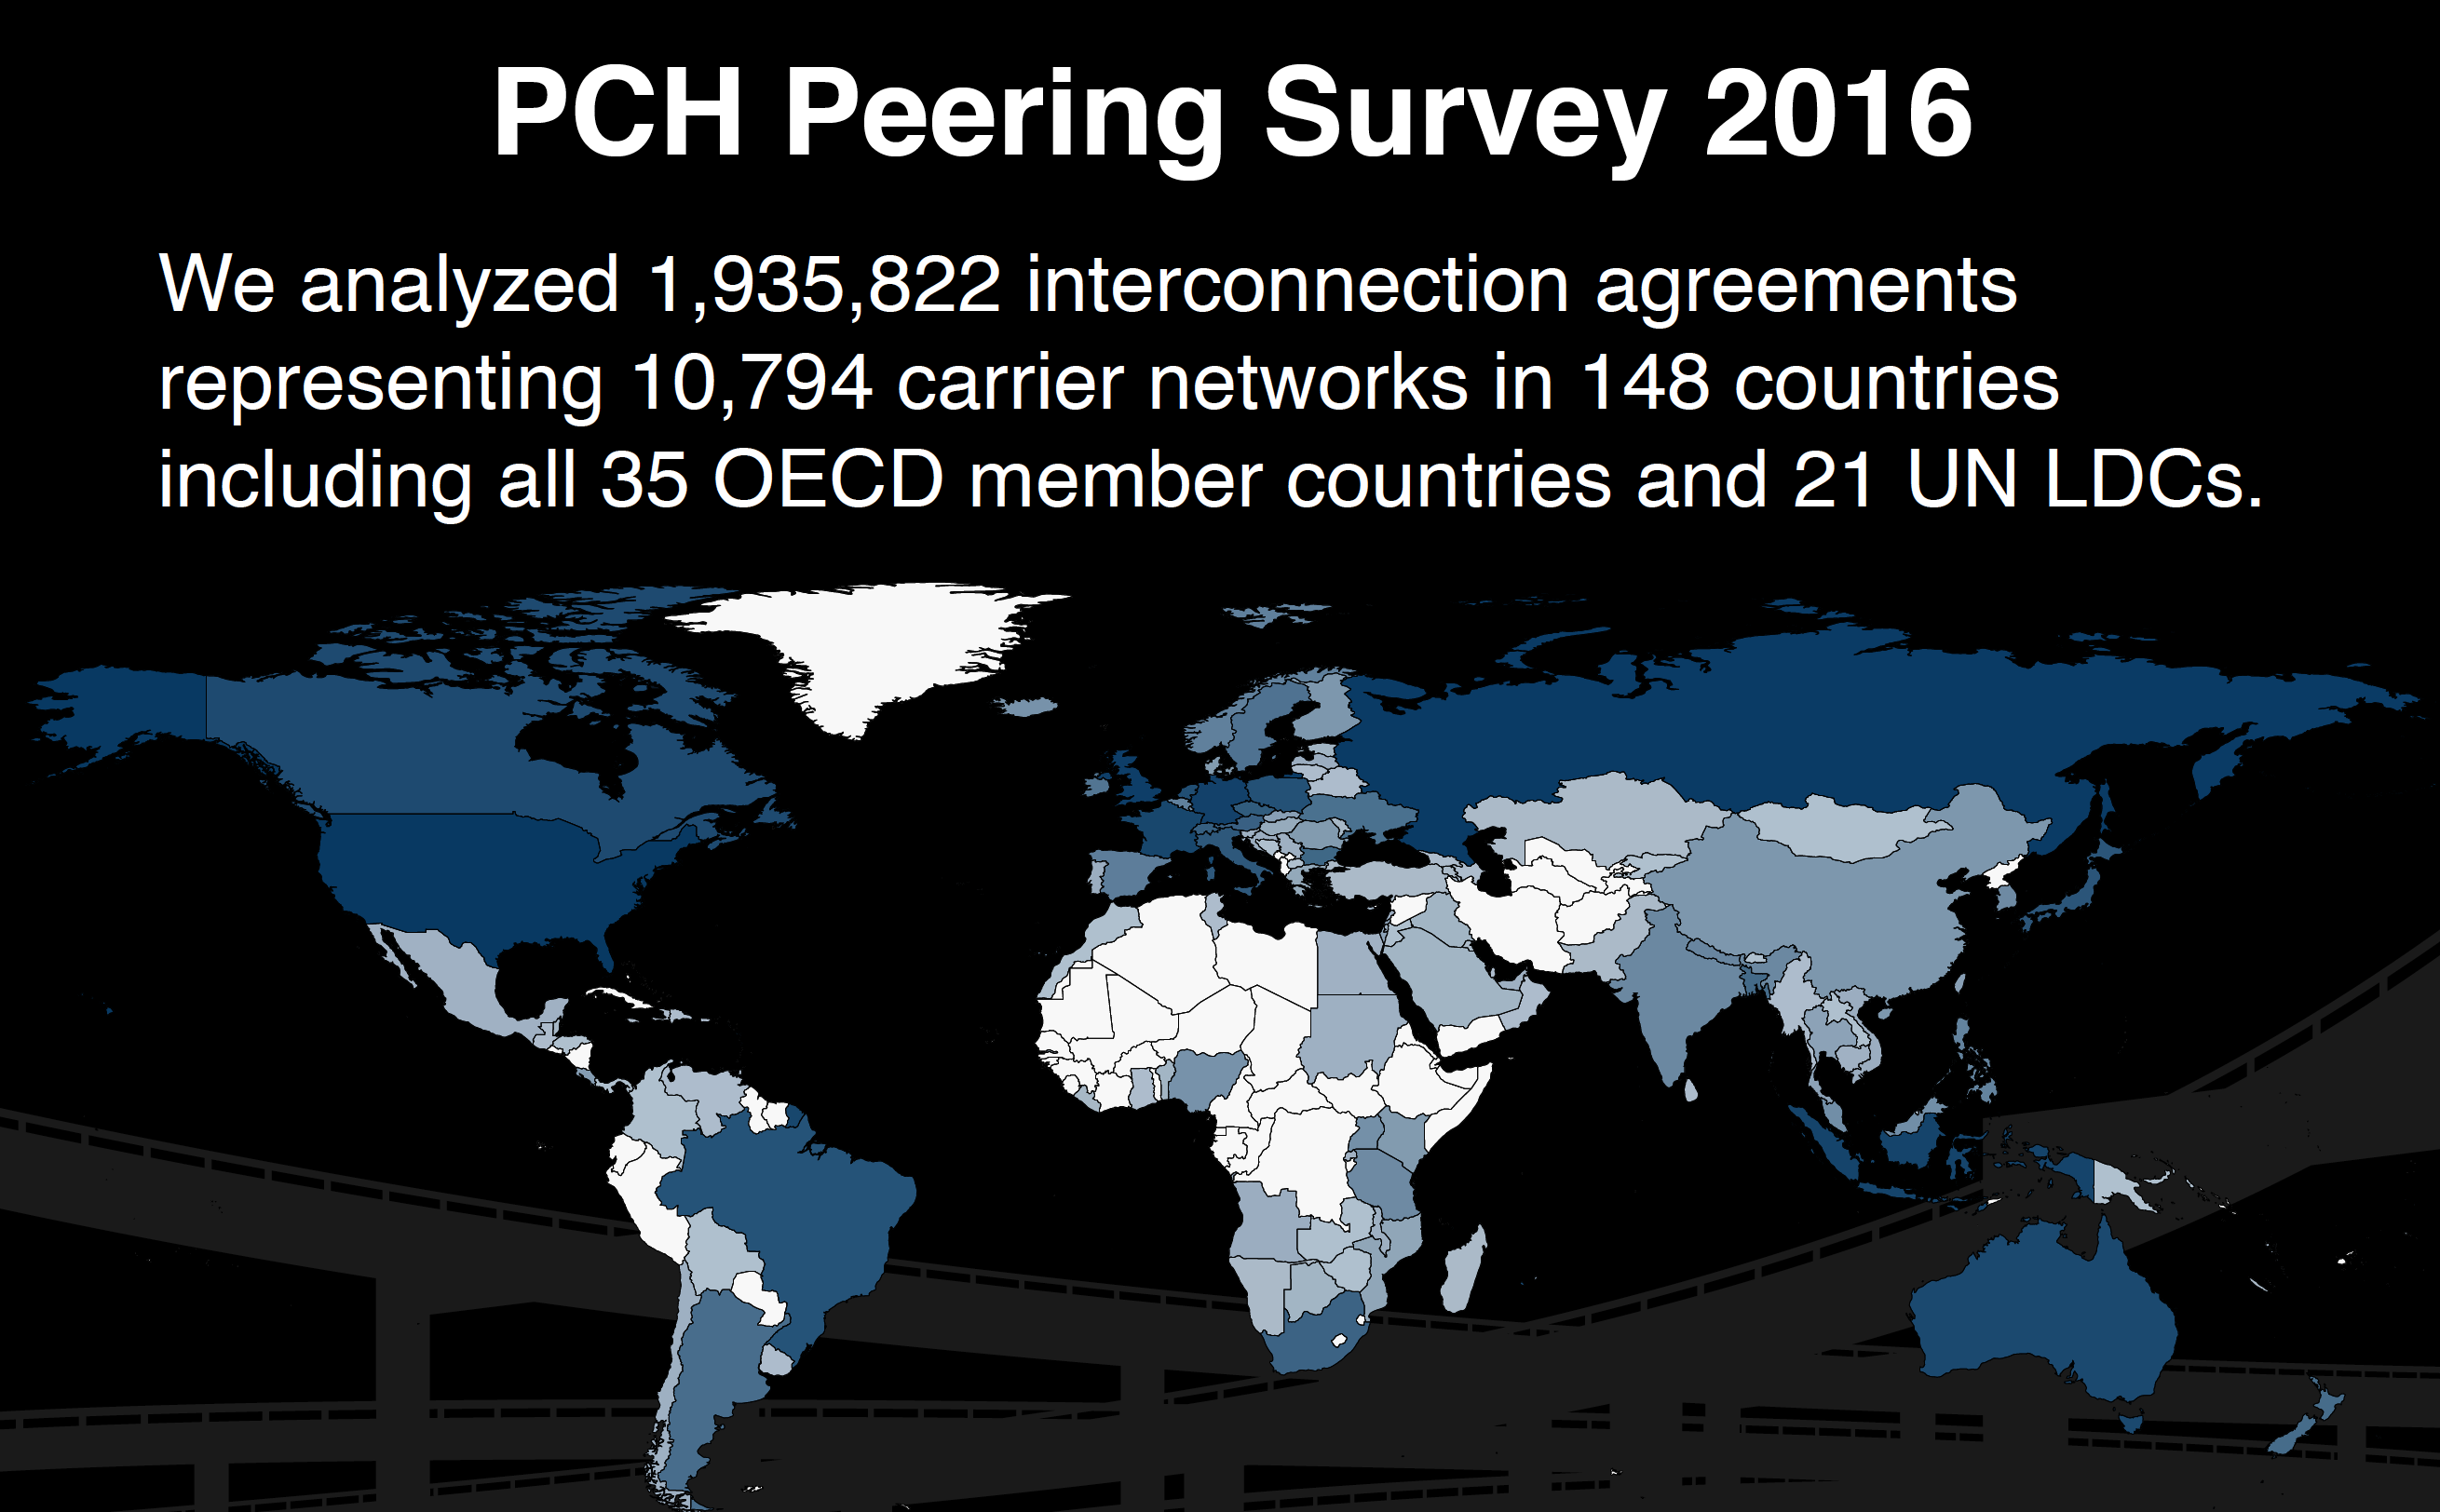 From PCH 2016 Survey of Interconnection Agreements, Bill Woodcock, Packet Clearing House